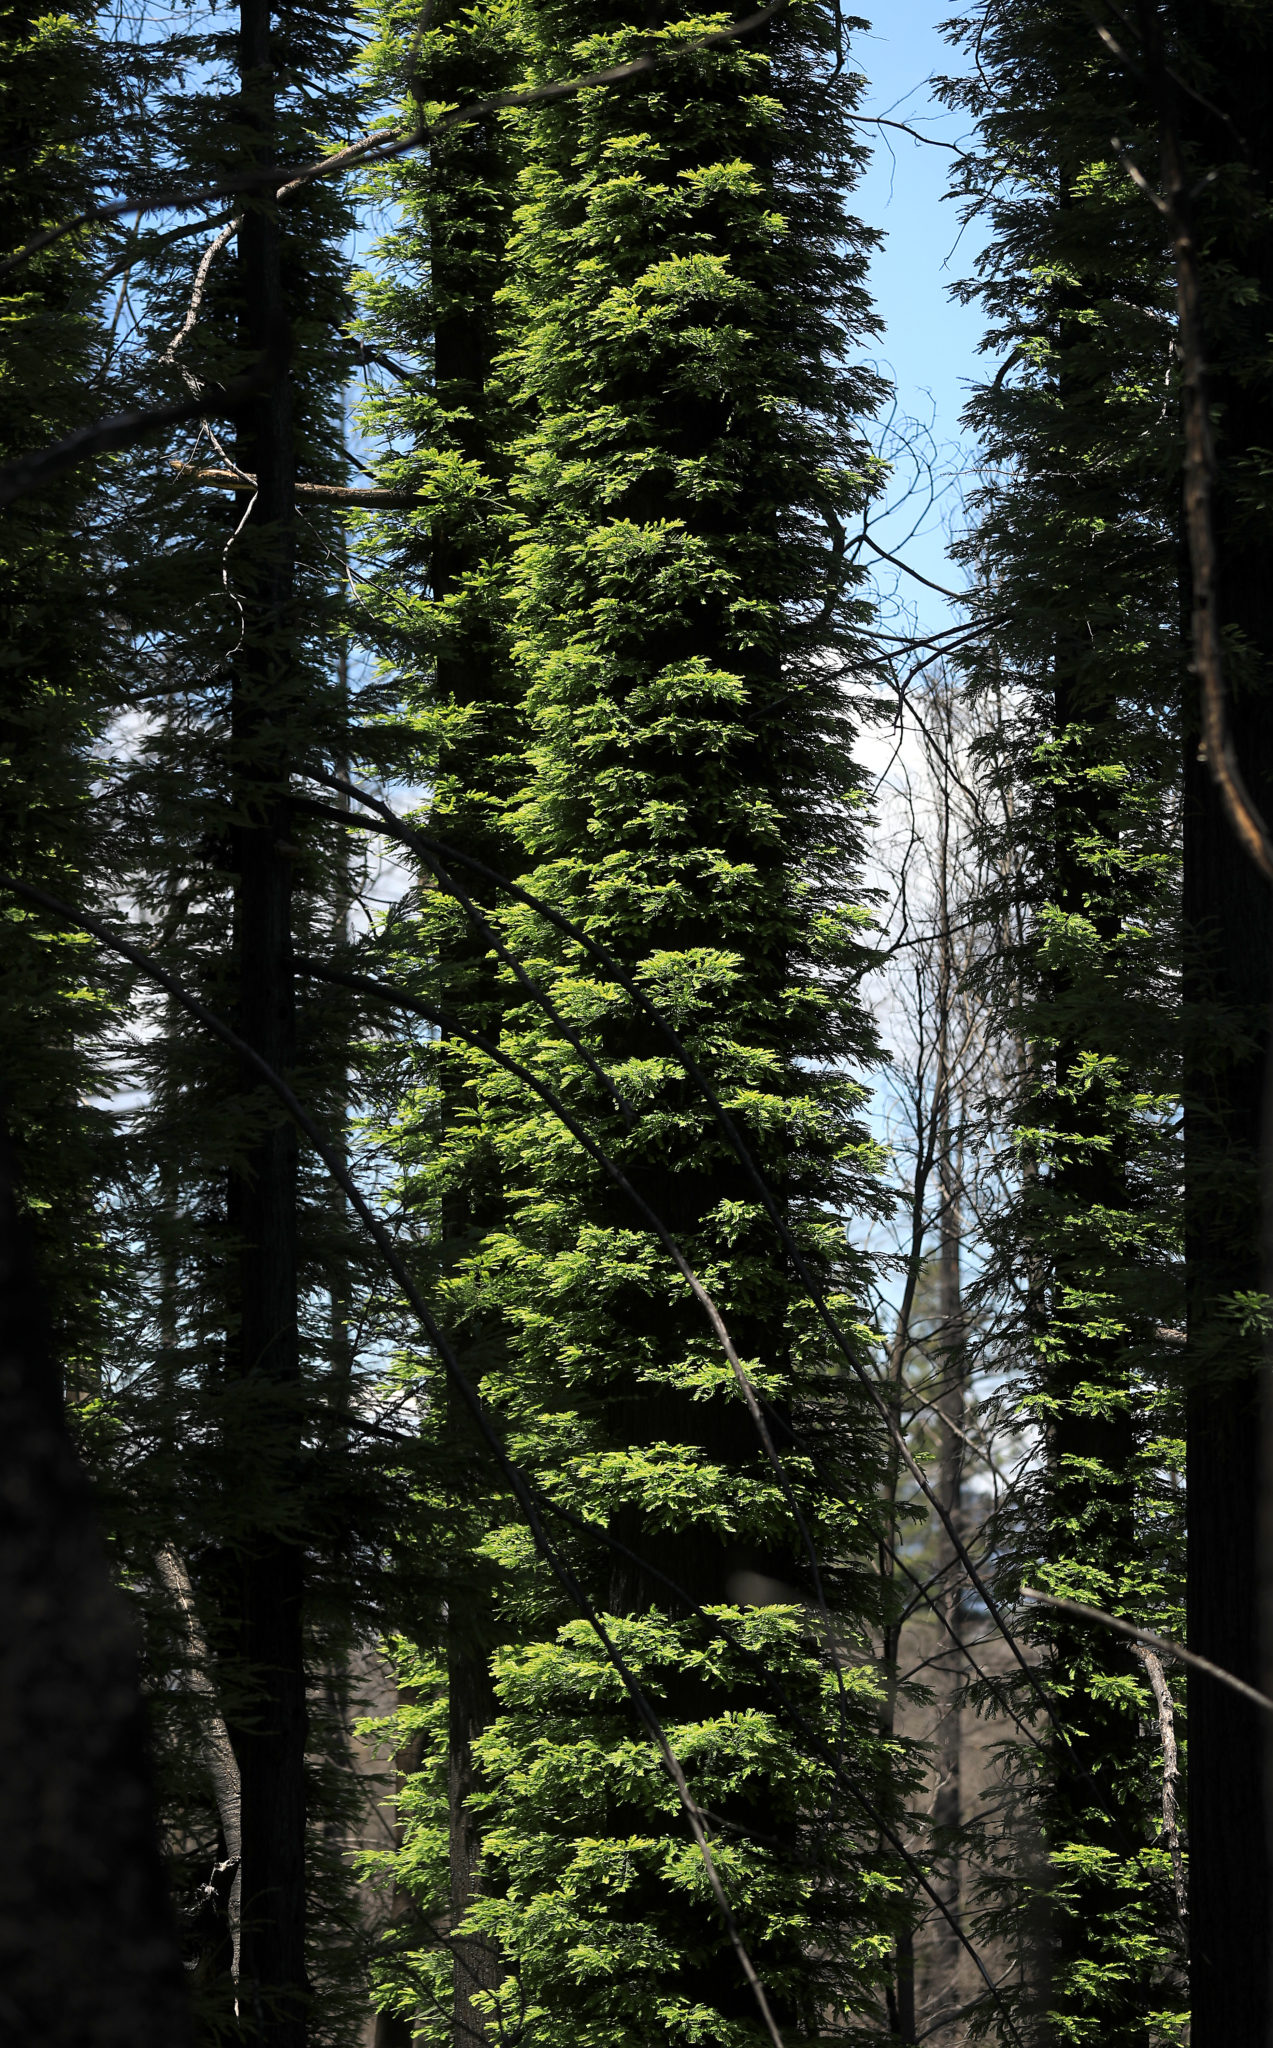 Redwood trees begin to regenerate at Pepperwood Preserve in a part of the preserve, severely damaged by the Tubbs fire, Tuesday, May 28, 2019. (Kent Porter / Press Democrat) 2019